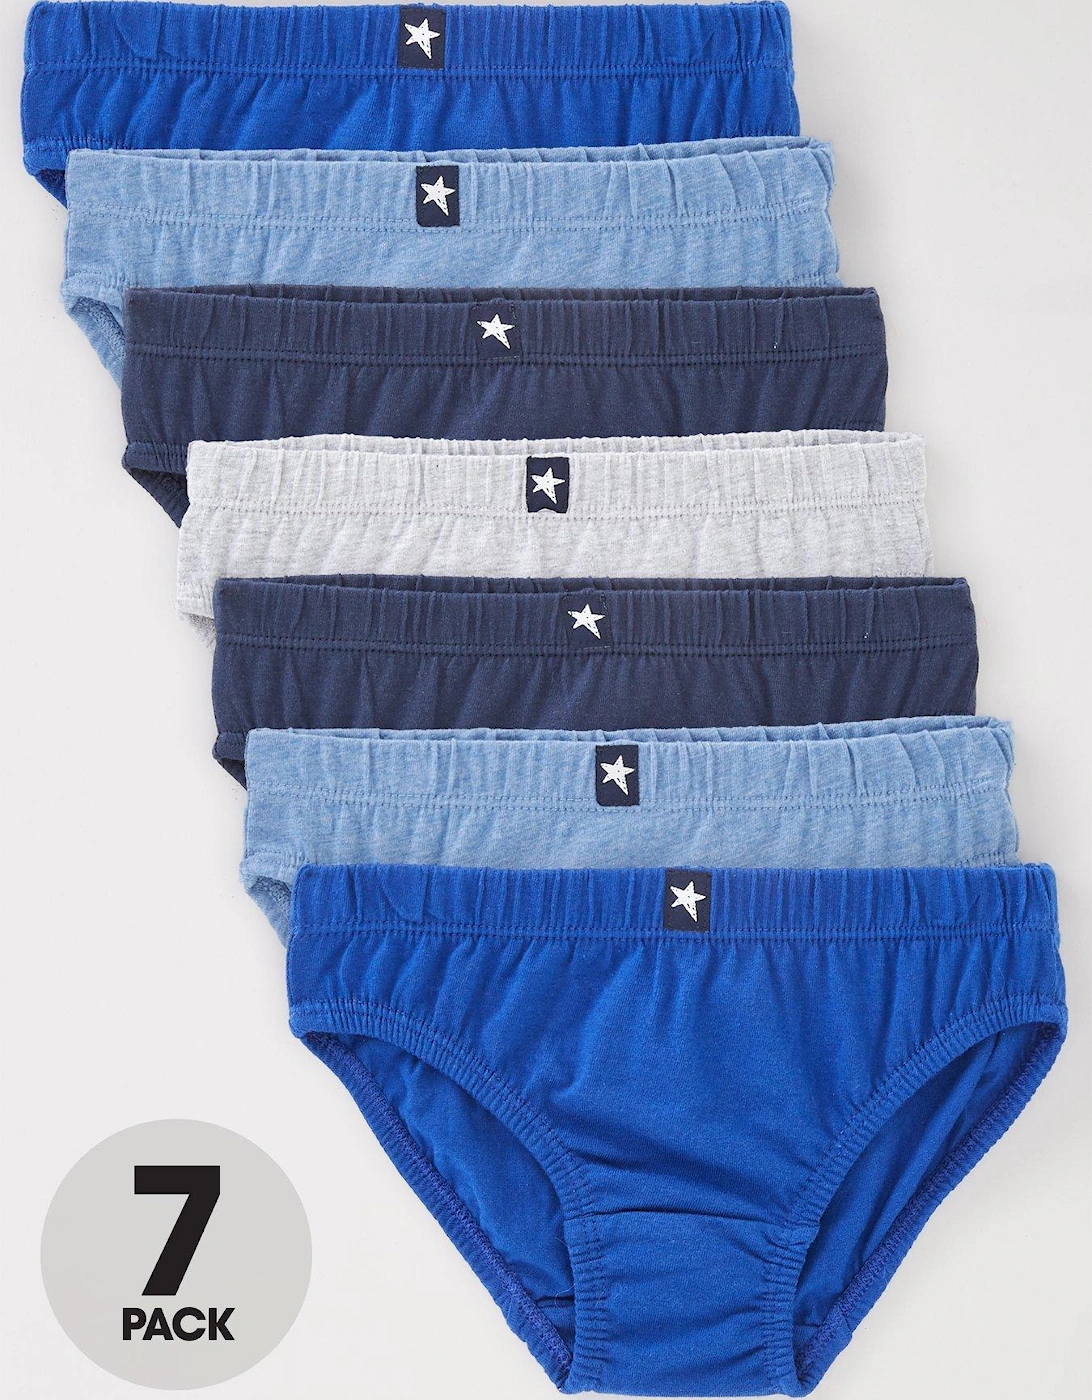 Boys 7 Pack Briefs - Blue, 3 of 2